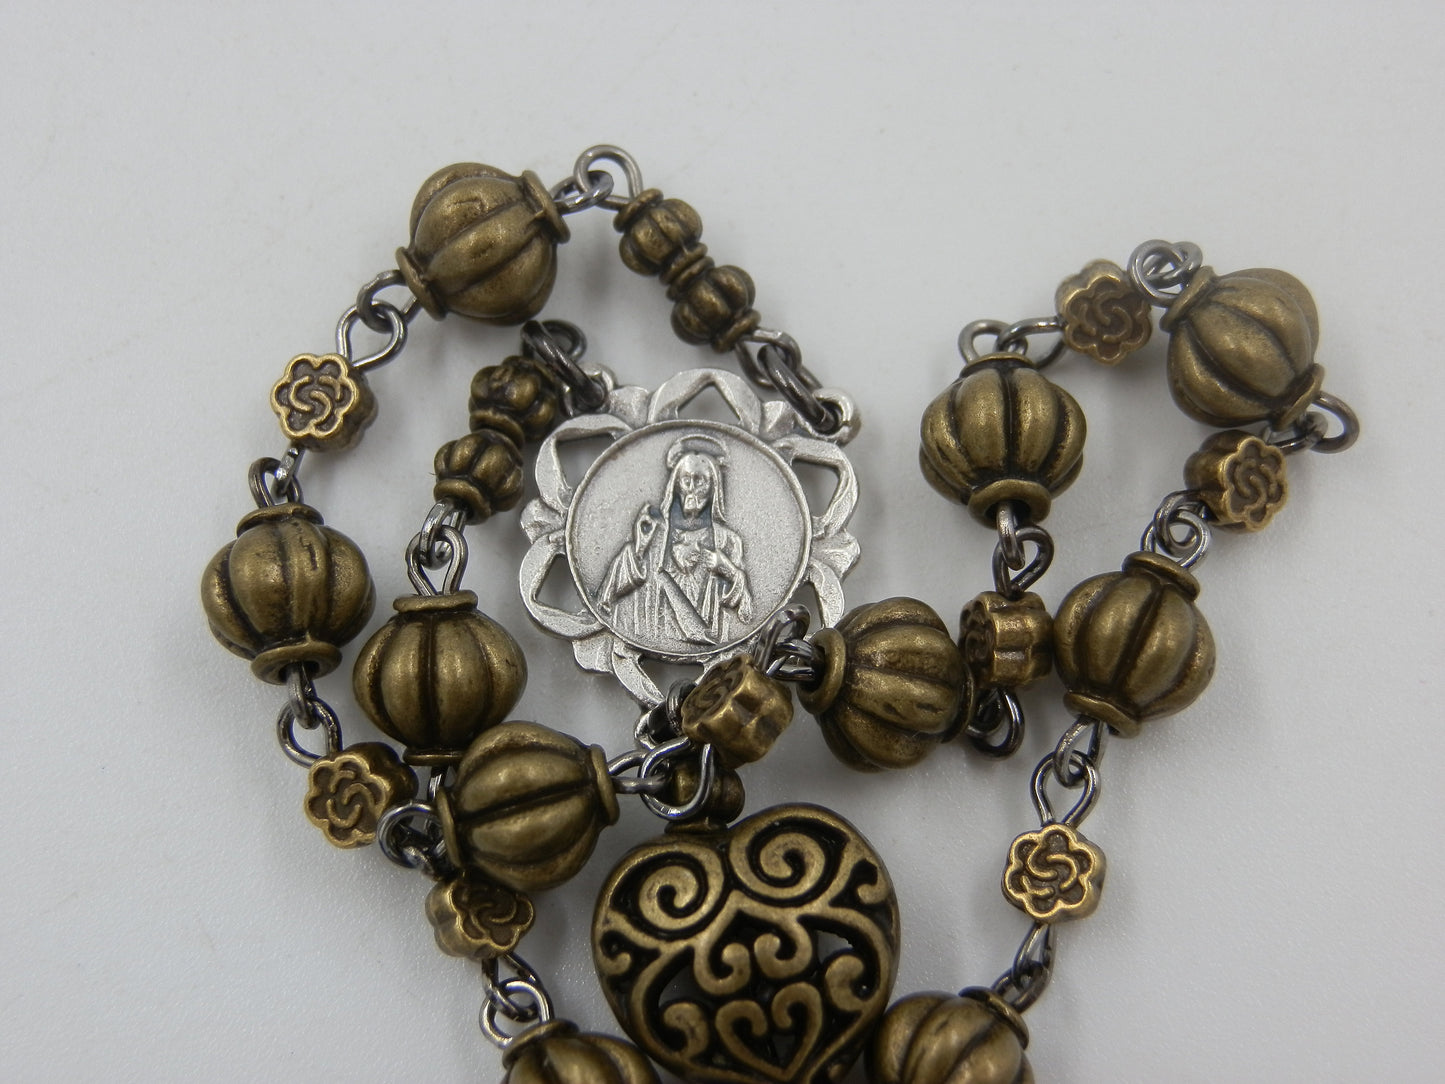 Vintage style Saint Therese prayer chaplet, St. Therese of Lisieux, St. Teresa, The Holy Child Jesus prayer Beads, Antique prayer beads.